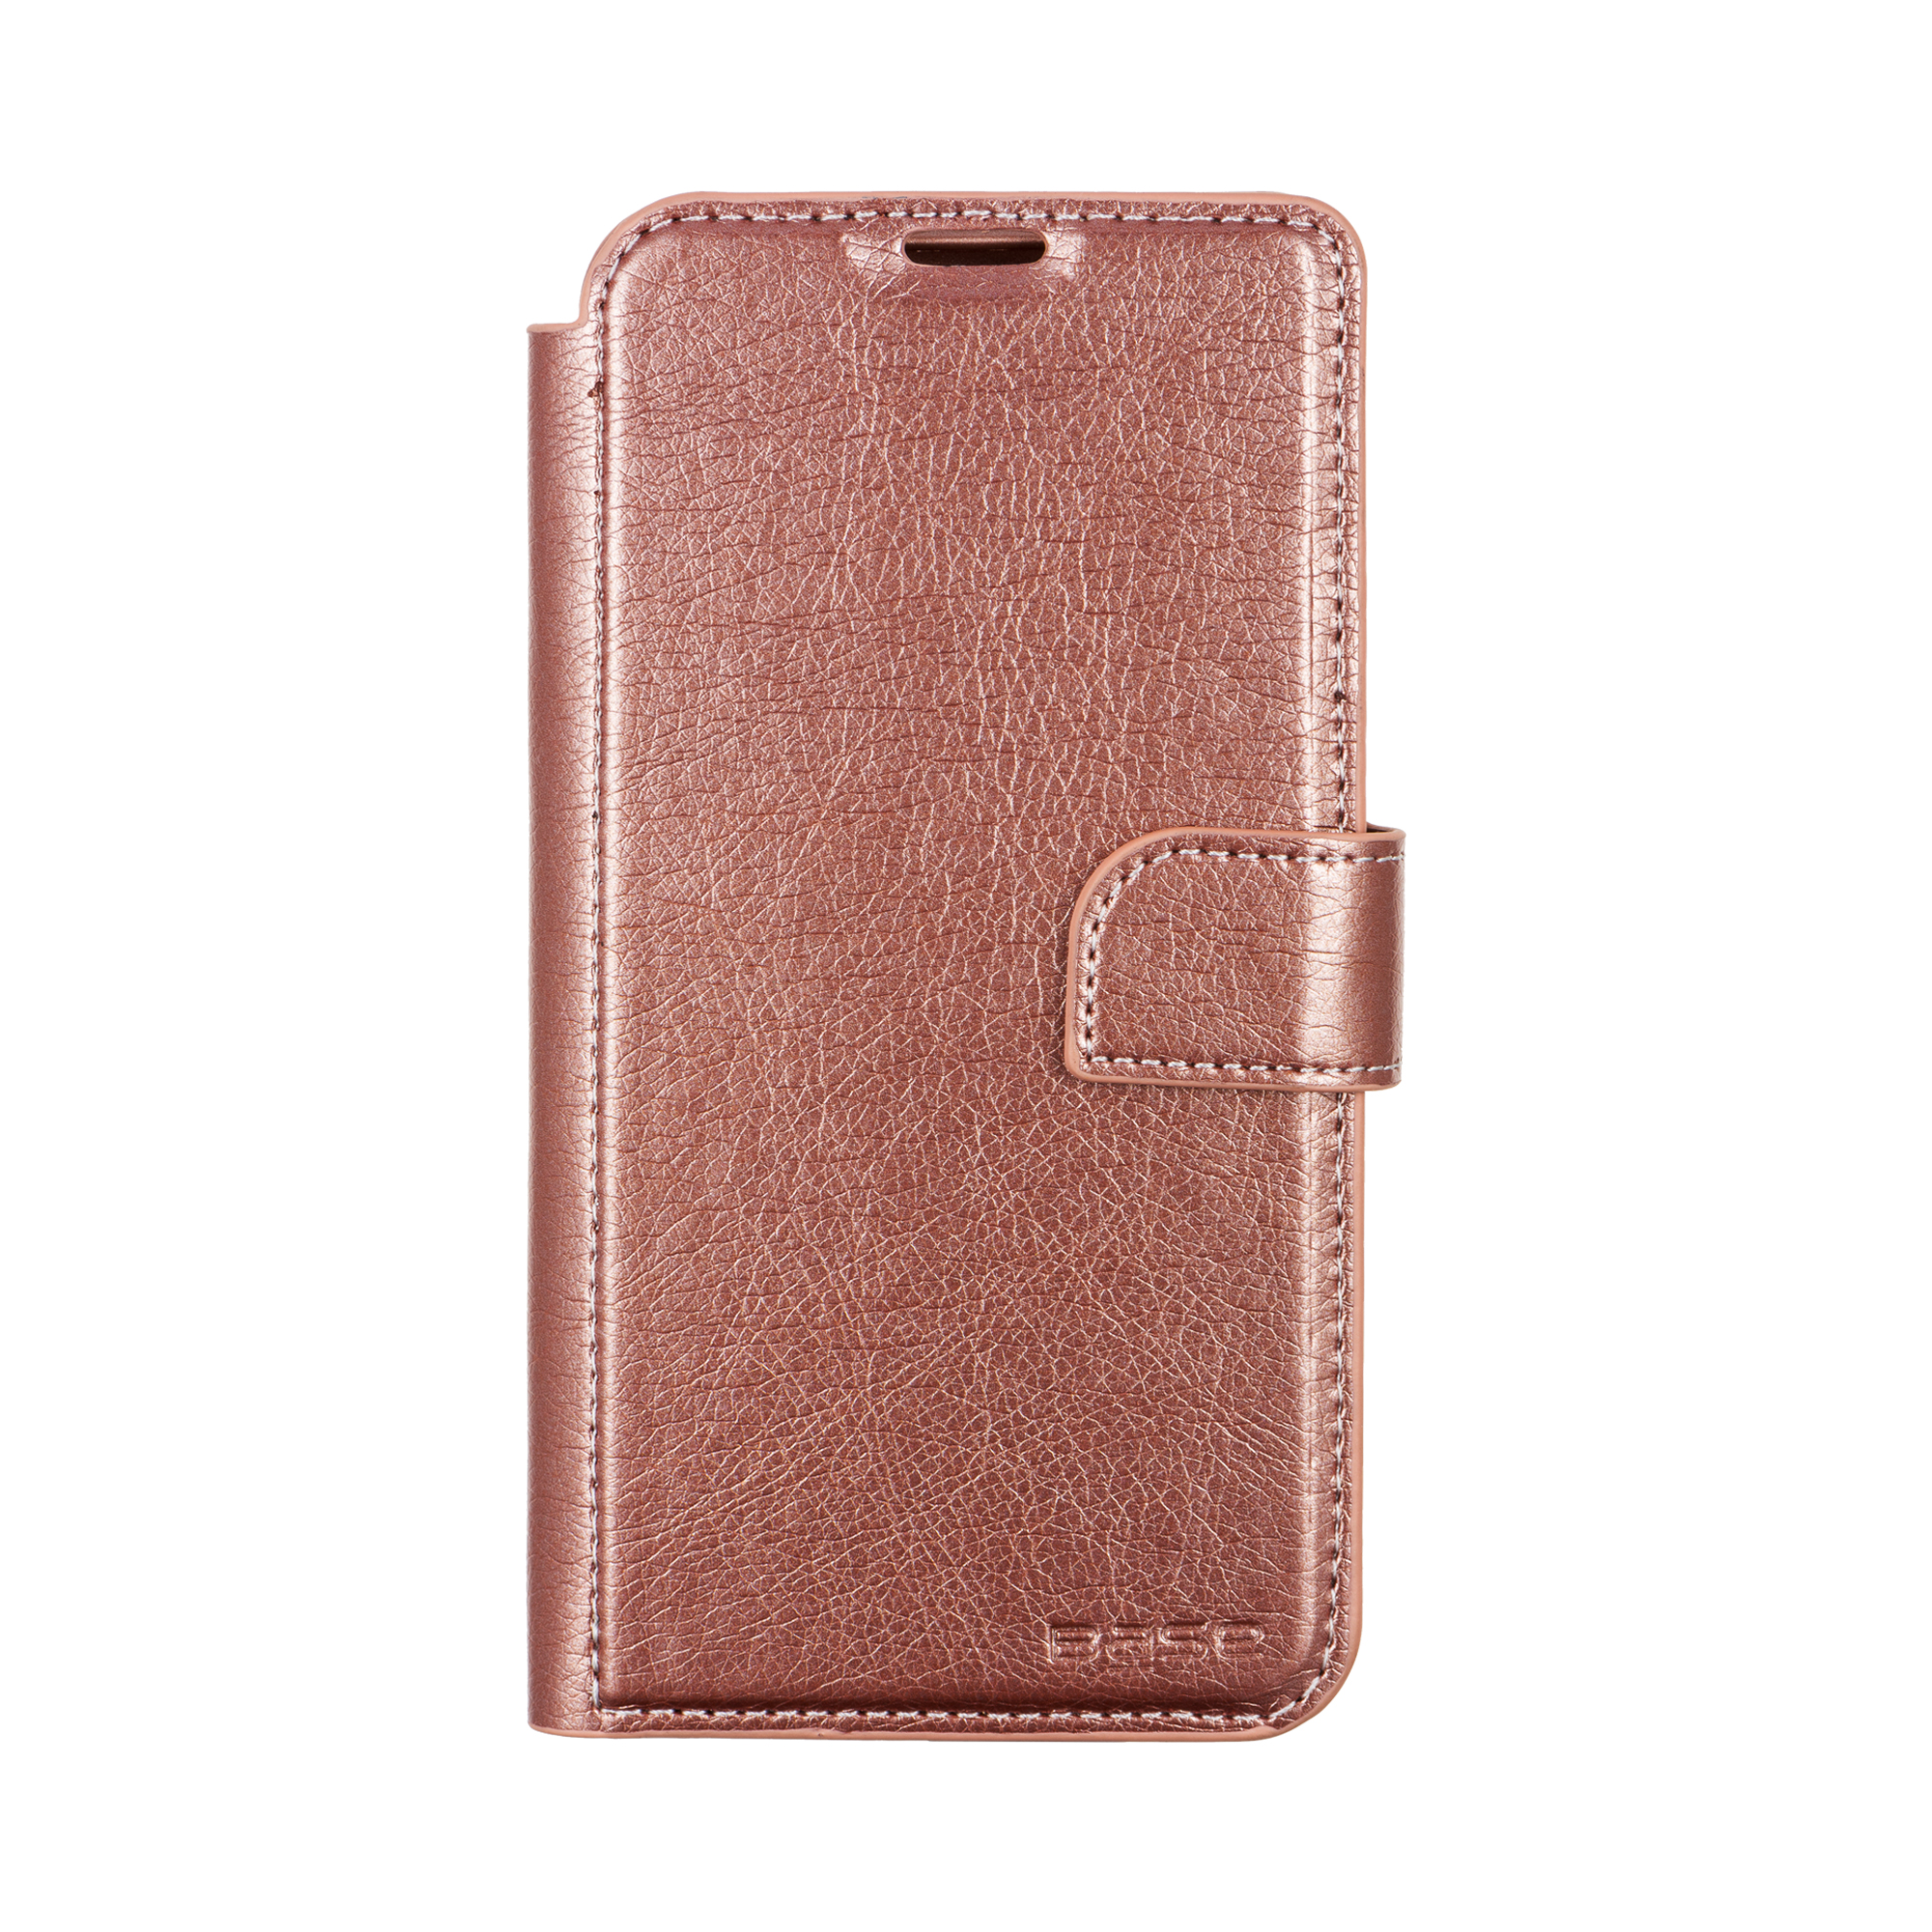 Rose Leather Wallet folio Case protector for iPhone 11 PRO cell phones